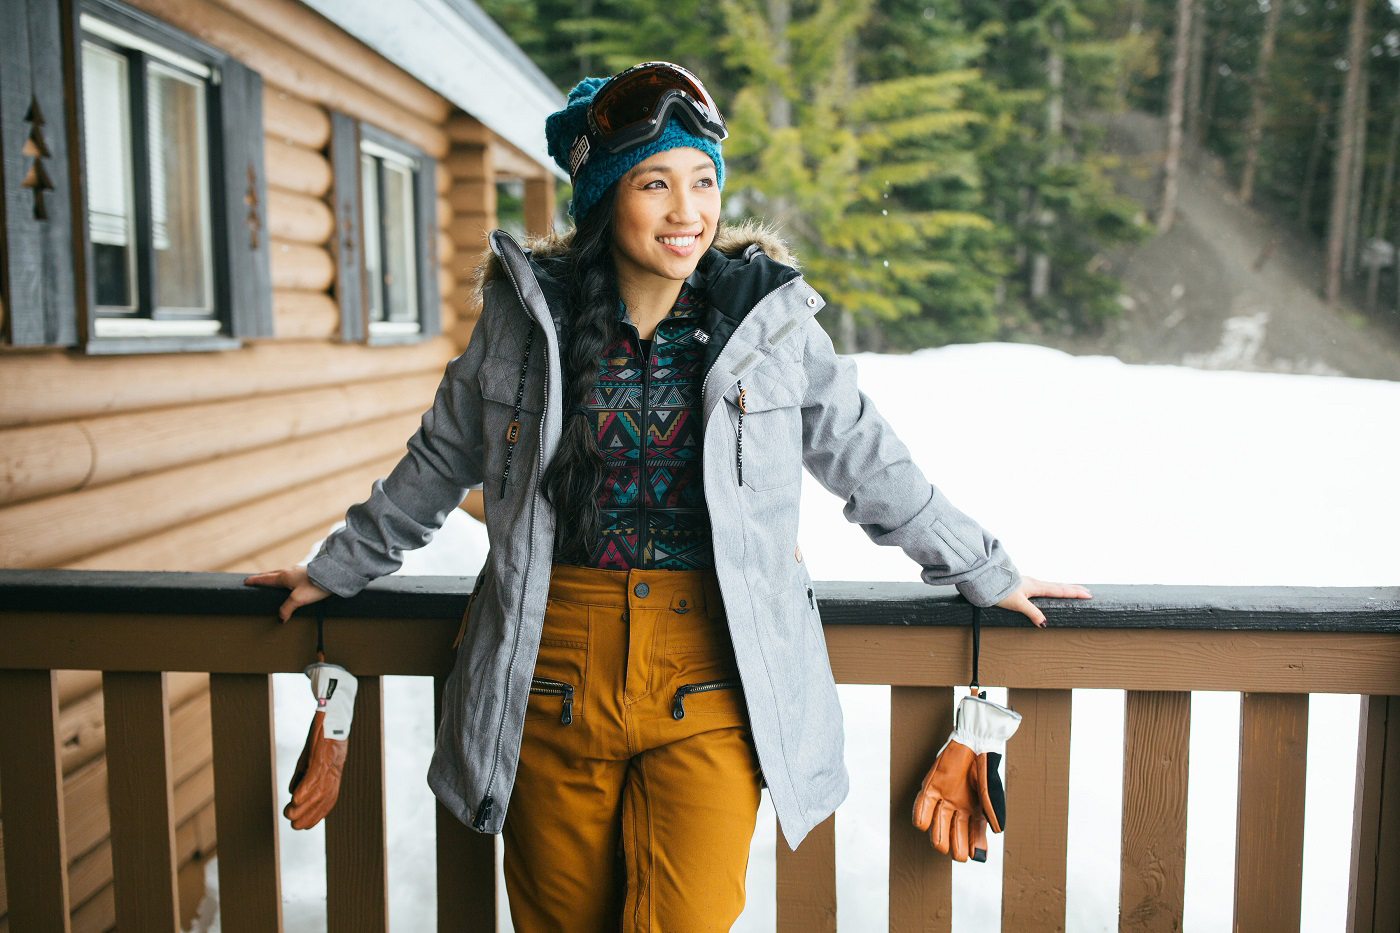 HOW TO DRESS FOR COLD WHEATHER SKIING, en